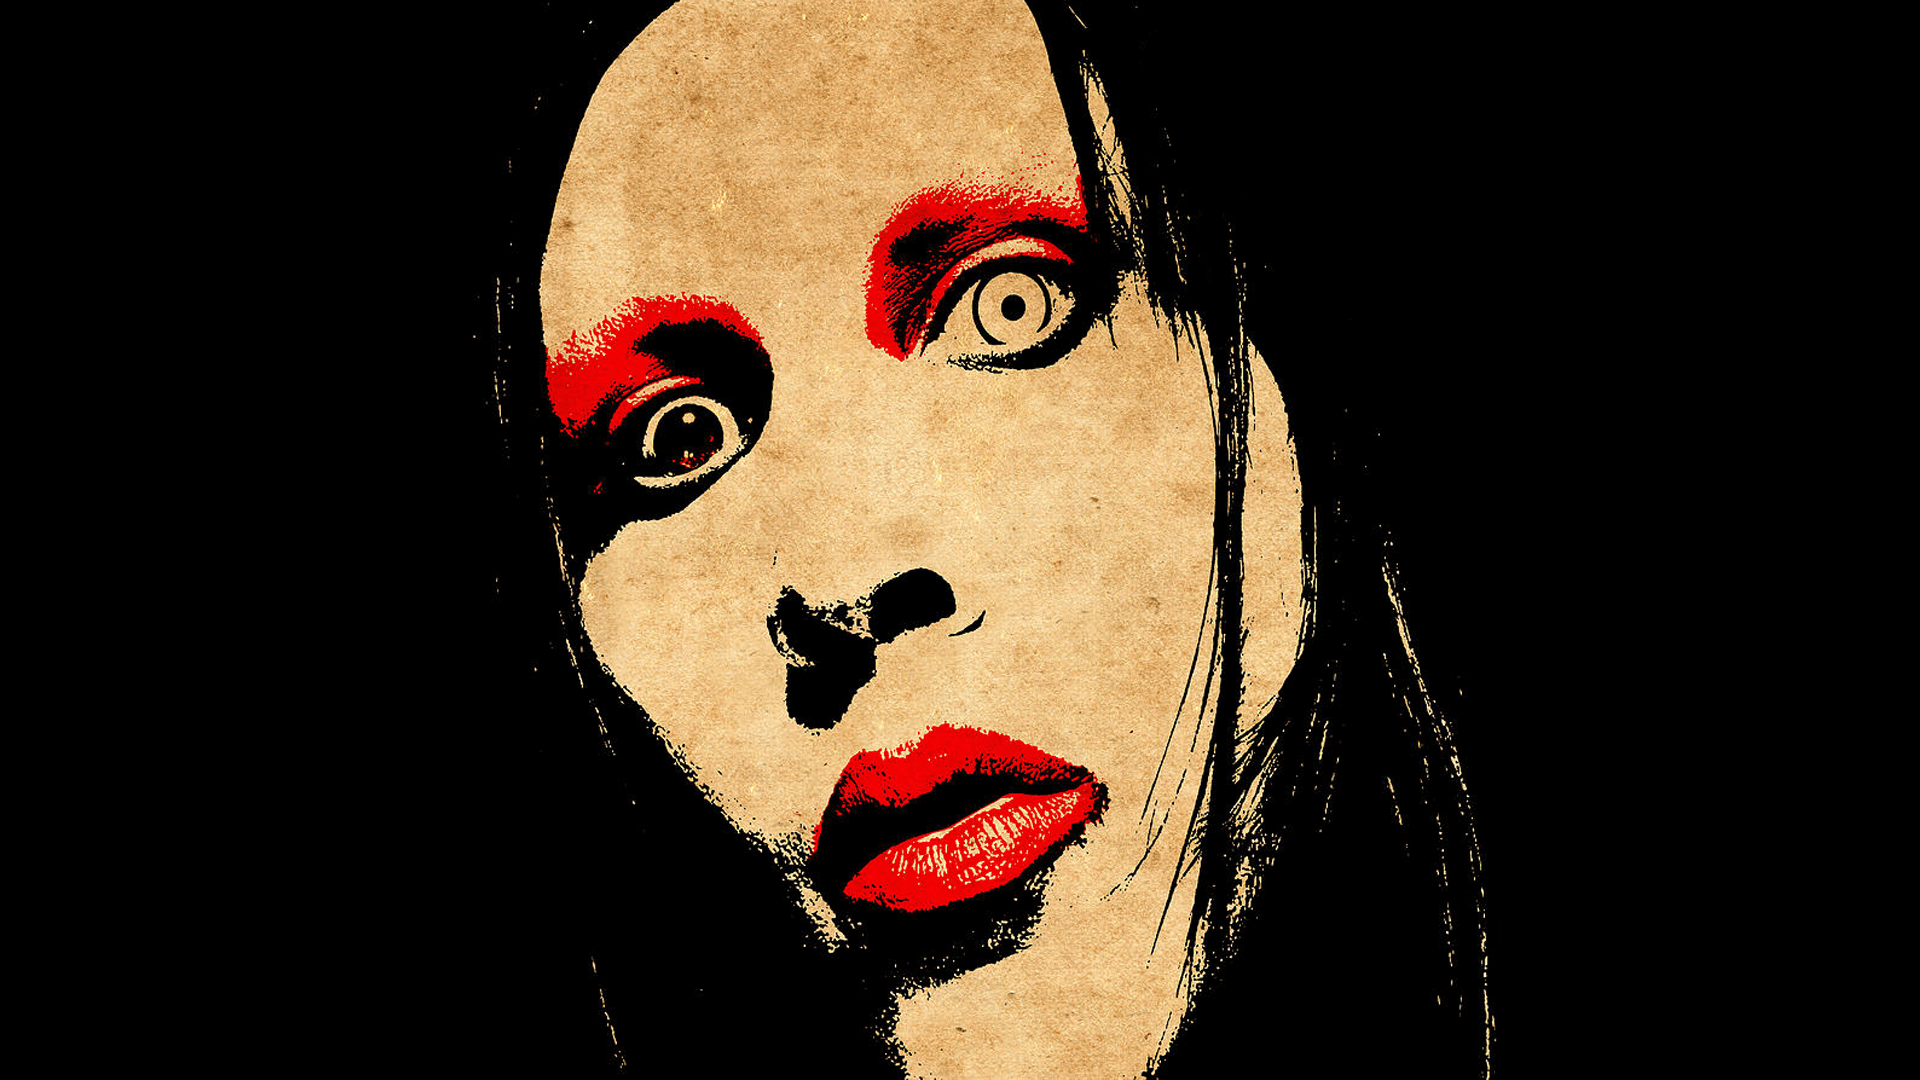 Marilyn Manson Wallpaper Image Photo Picture Background